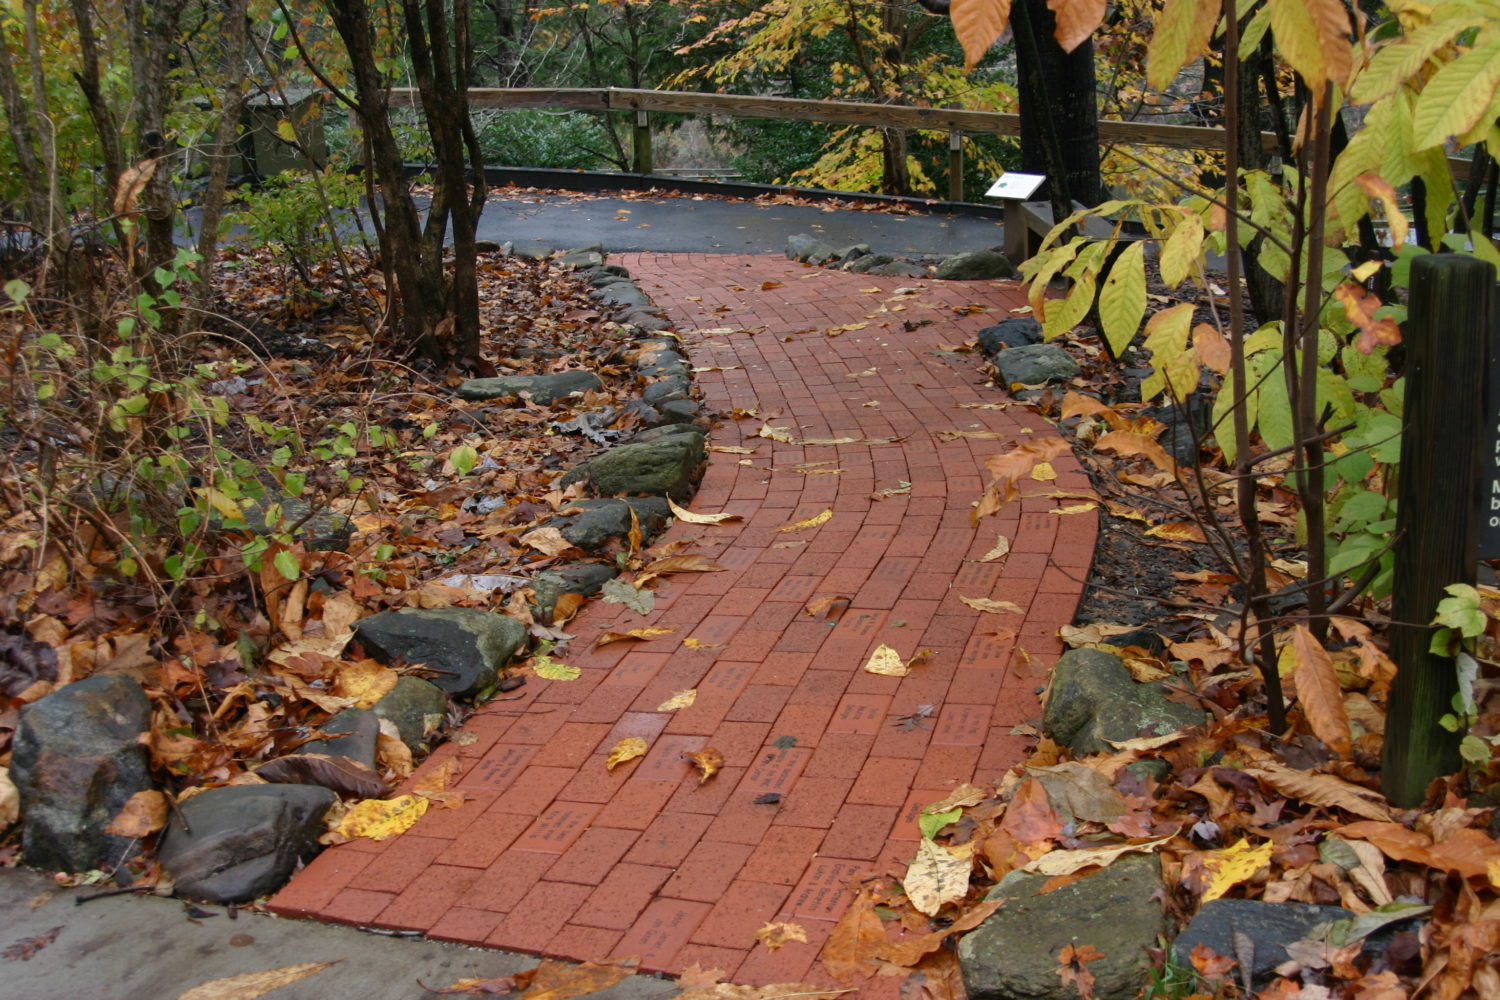 A brick pathway at the Nature Center.